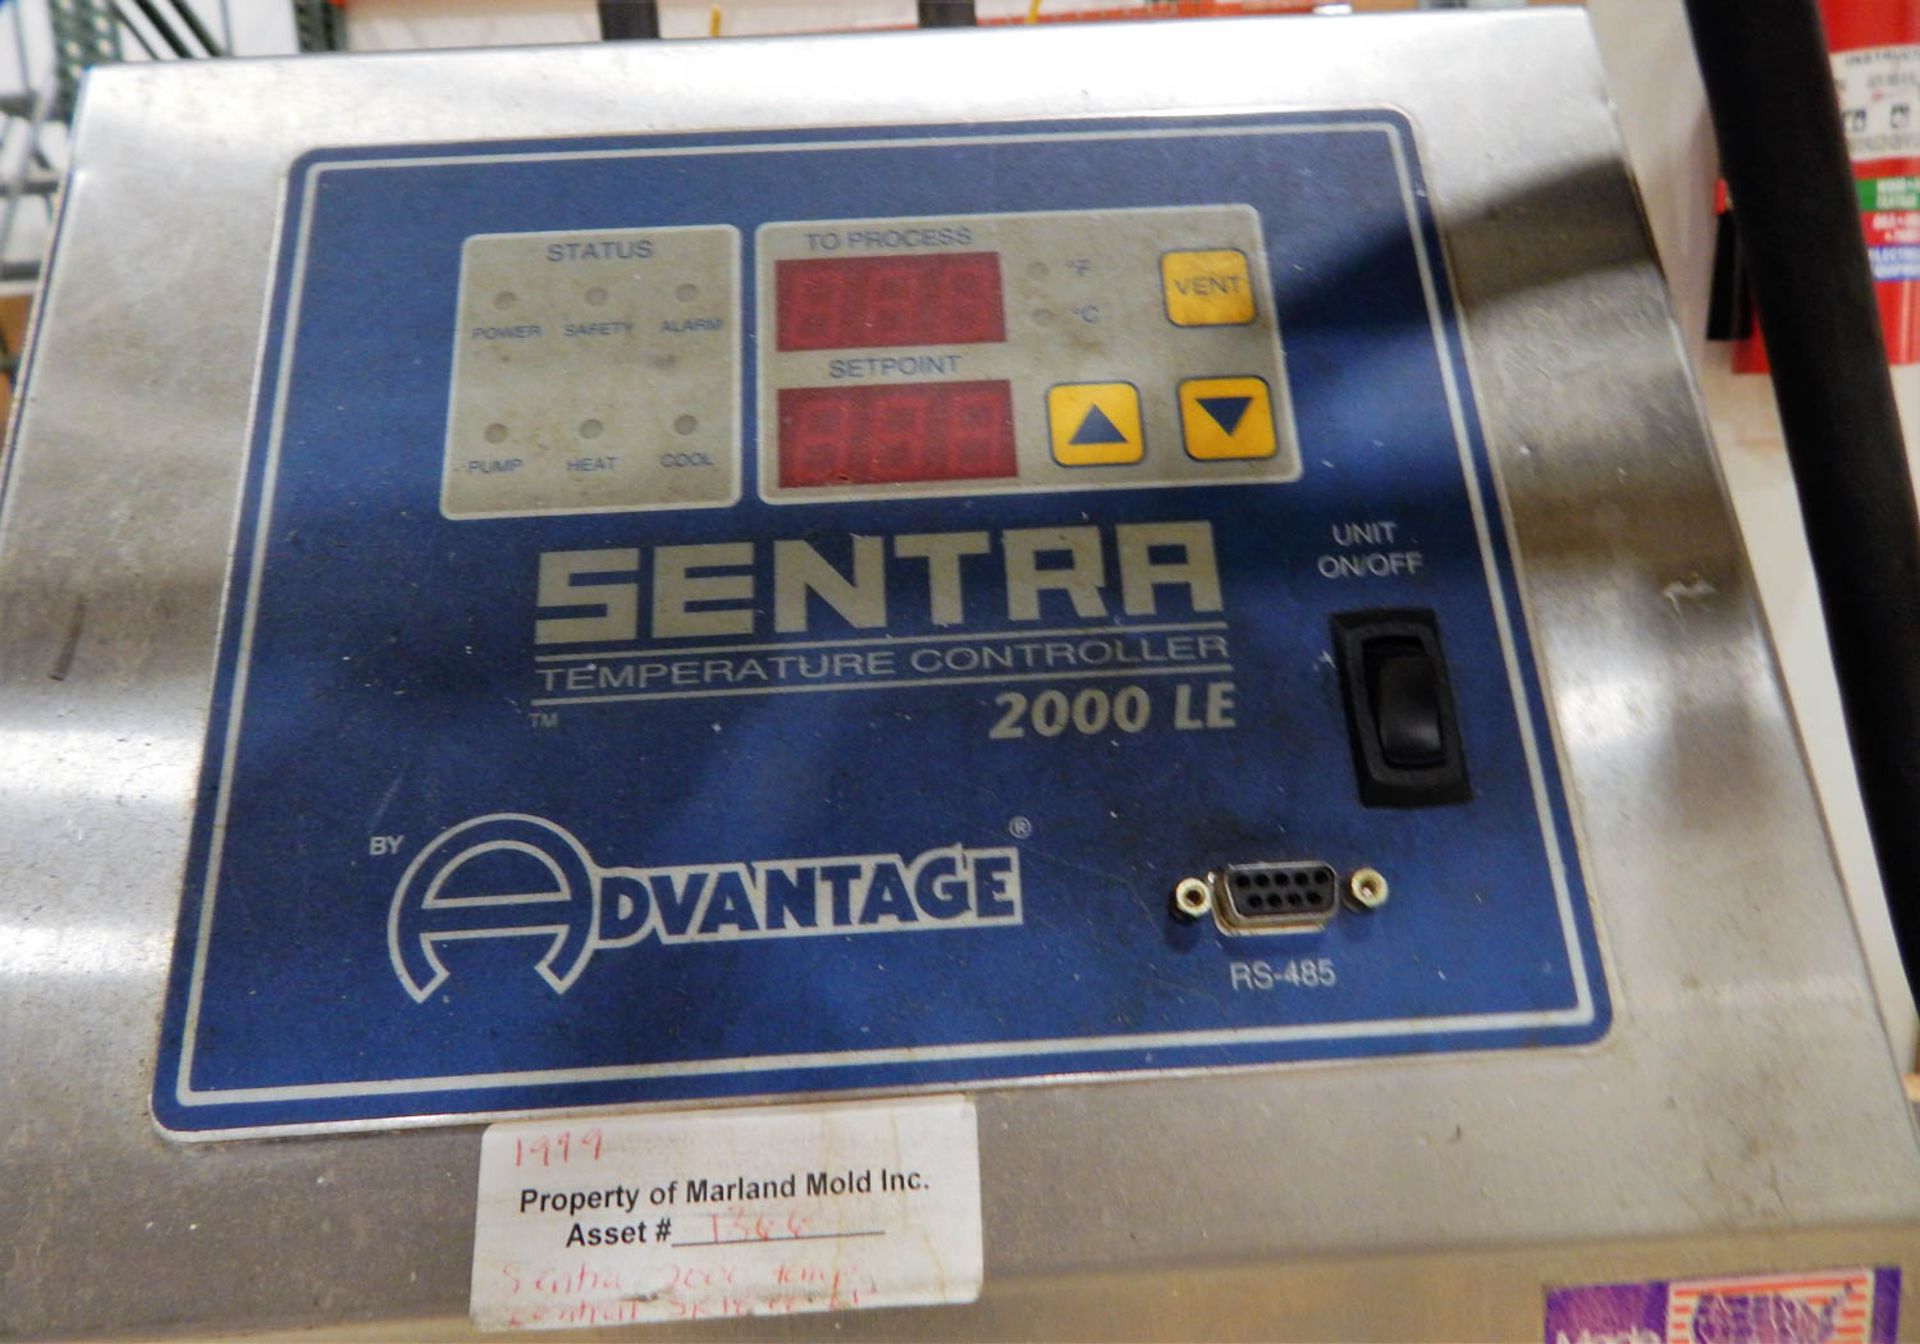 ADVANTAGE MDL. 2000LC SENTRA TEMPERATURE CONTROLLER, WITH 30 - 250-DIGITAL TEMPERATURE RANGE, S/N: - Image 3 of 3